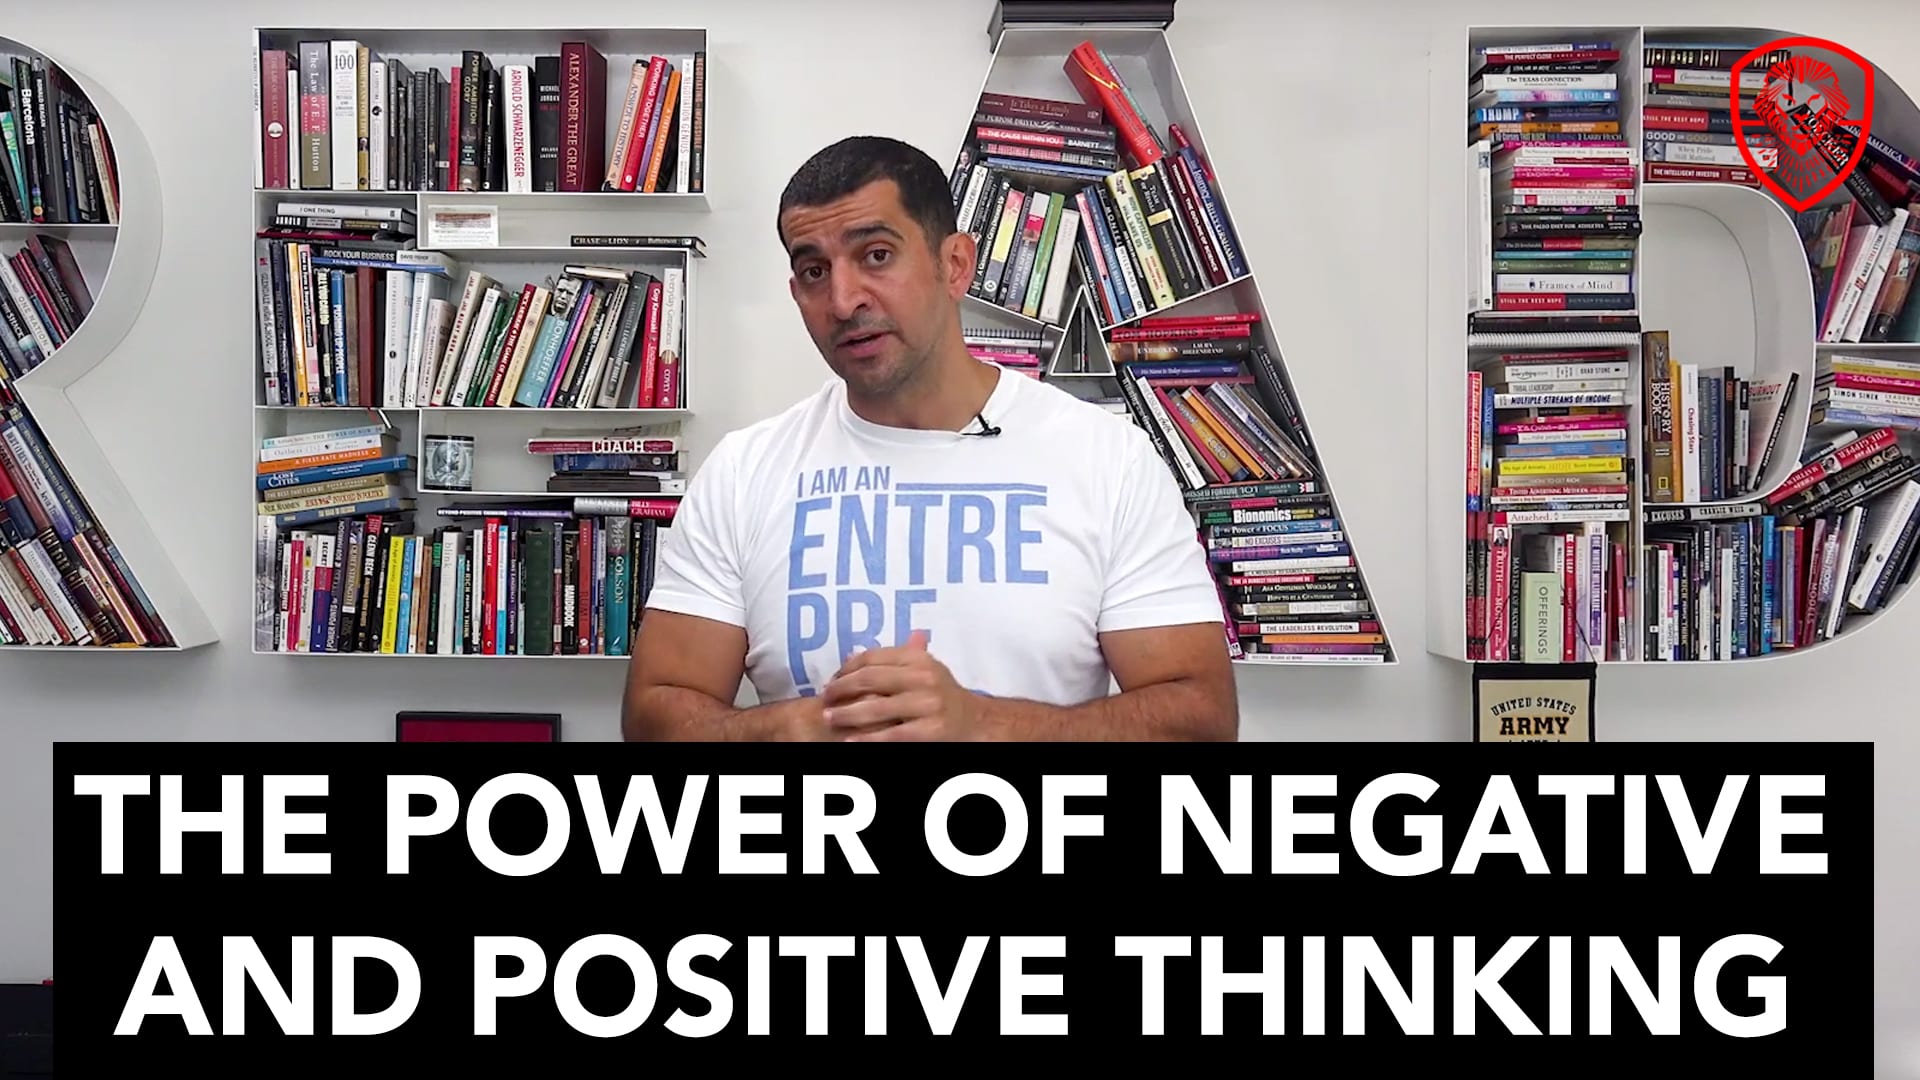 The Power of Negative and Positive Thinking